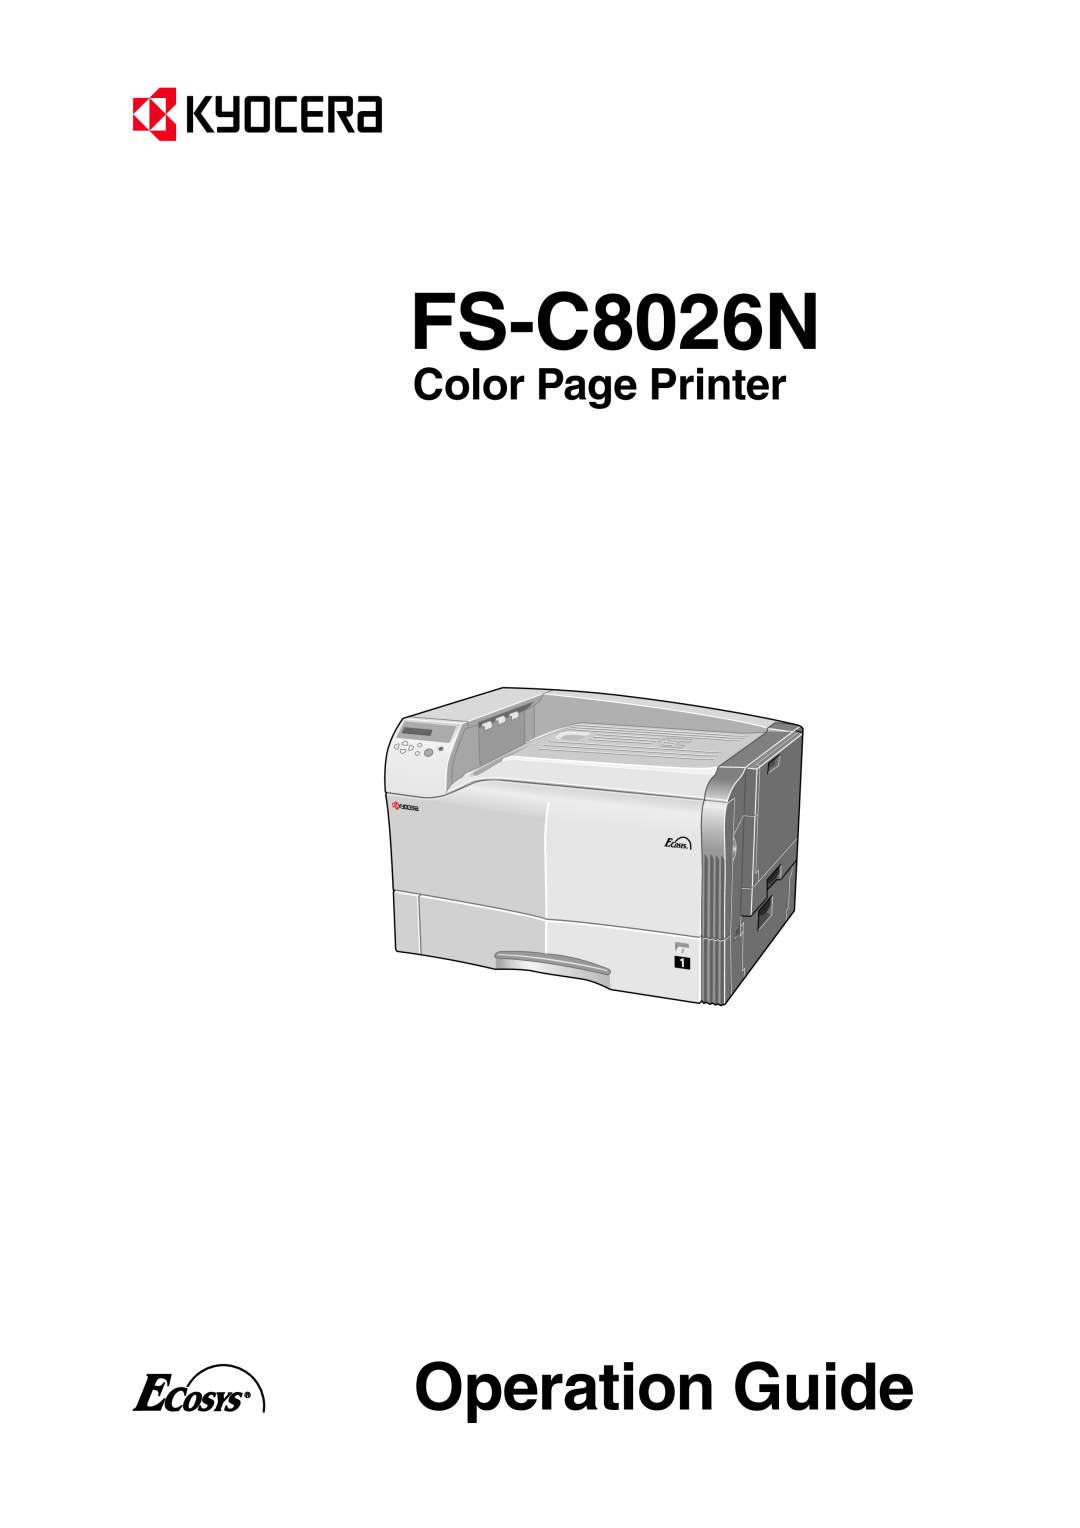 Kyocera manual FS-C8026N, Operation Guide, Color Page Printer 